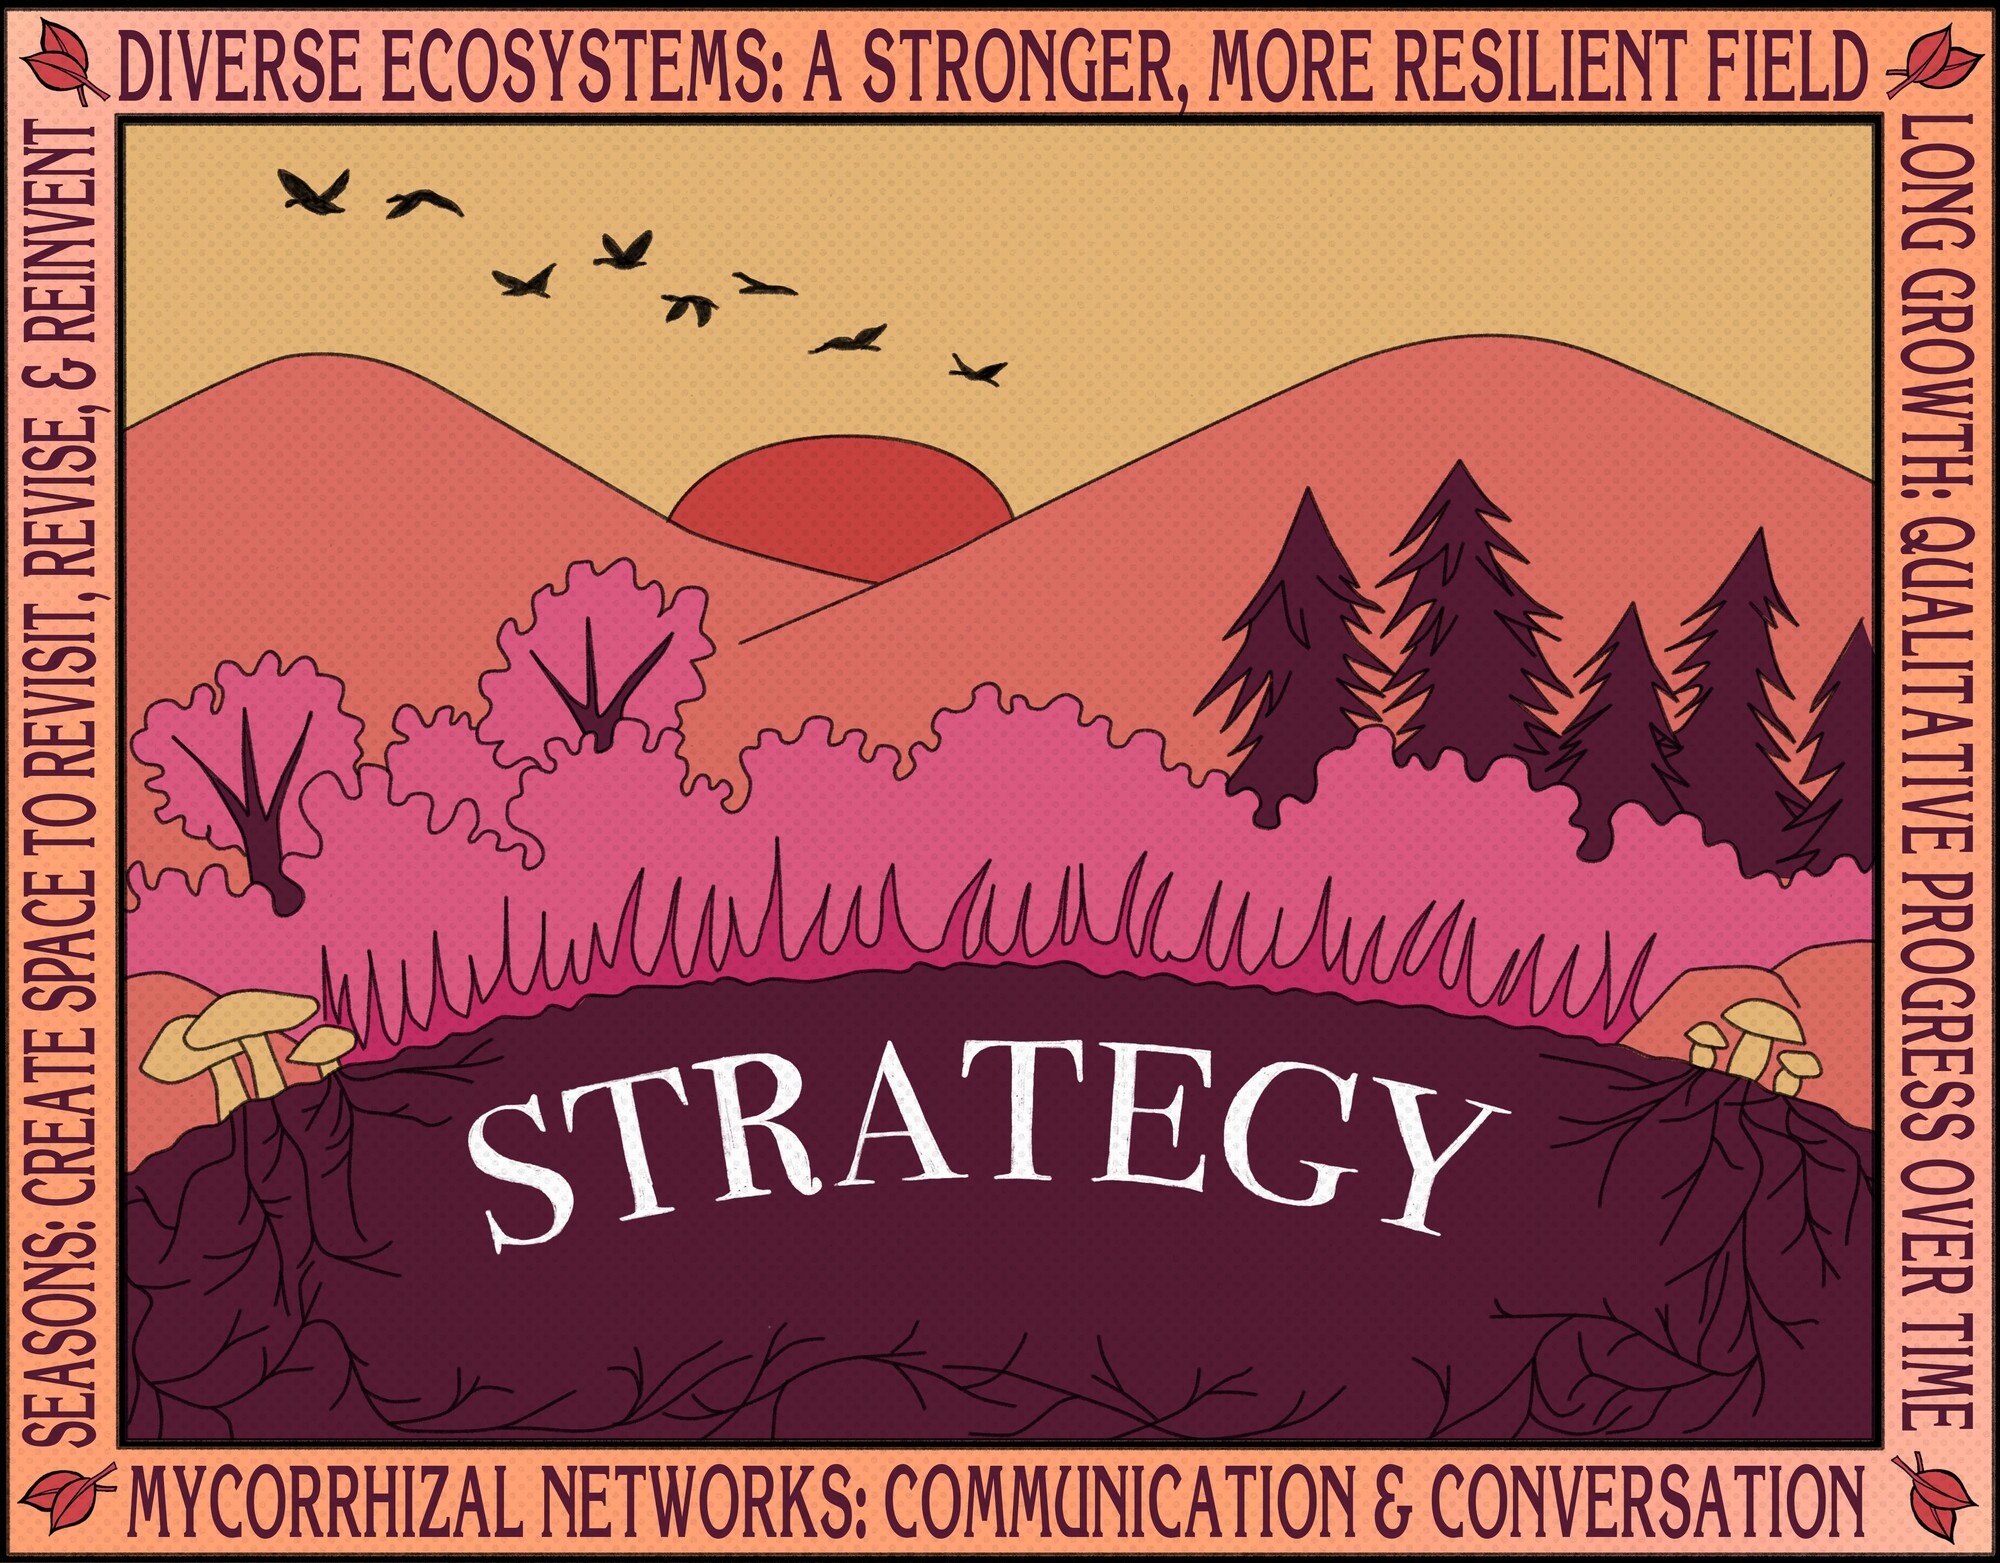 A pinkish-orange image with the word "Strategy" against a forest and mountain background with the words "diverse ecosystems," "long growth," "mycorrhizal networks," and "seasons" in the margins. 